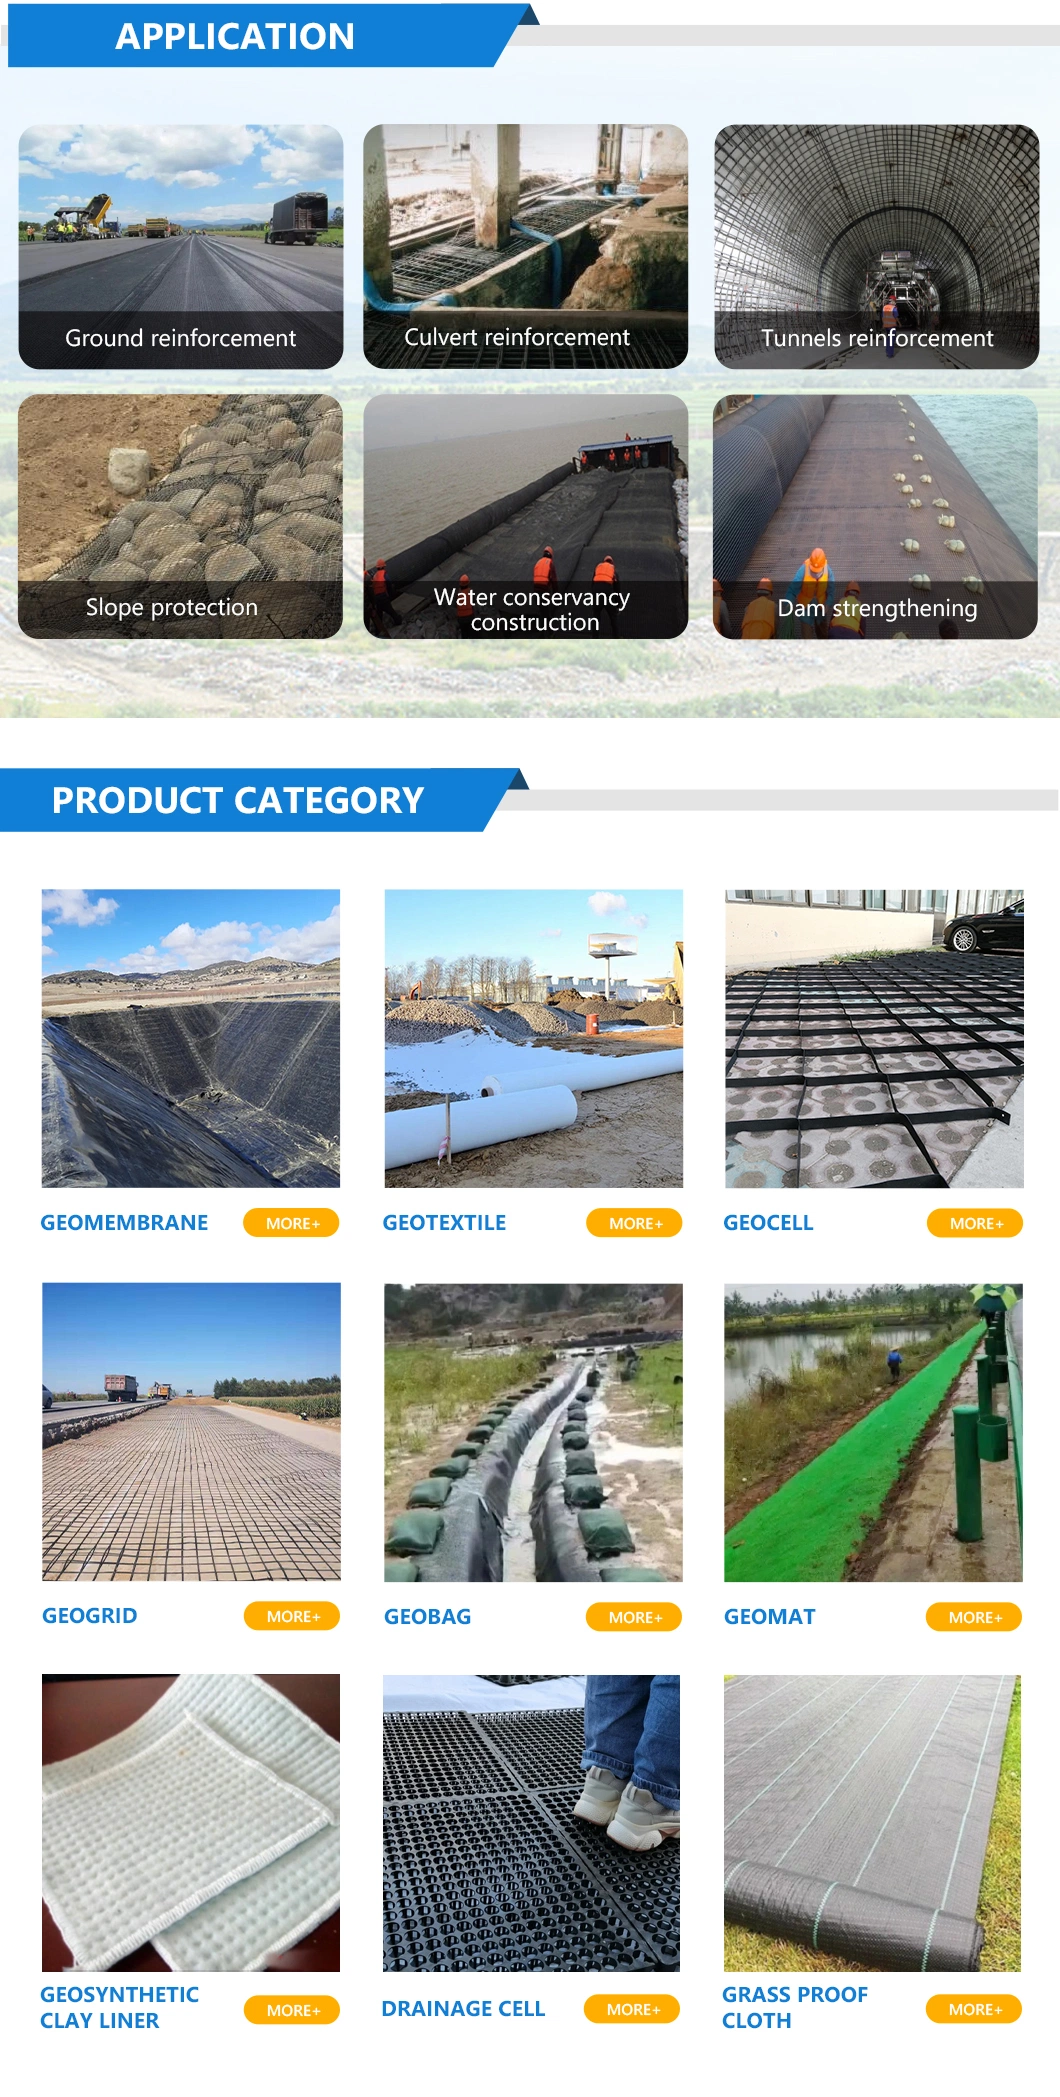 China Geogrid Manufacturer Fiberglass/Polyester Biaxial/PP Uniaxial/Plastic/Mining/Steel-Plastic Geogrid Manufacturer for Wall Reinforcement